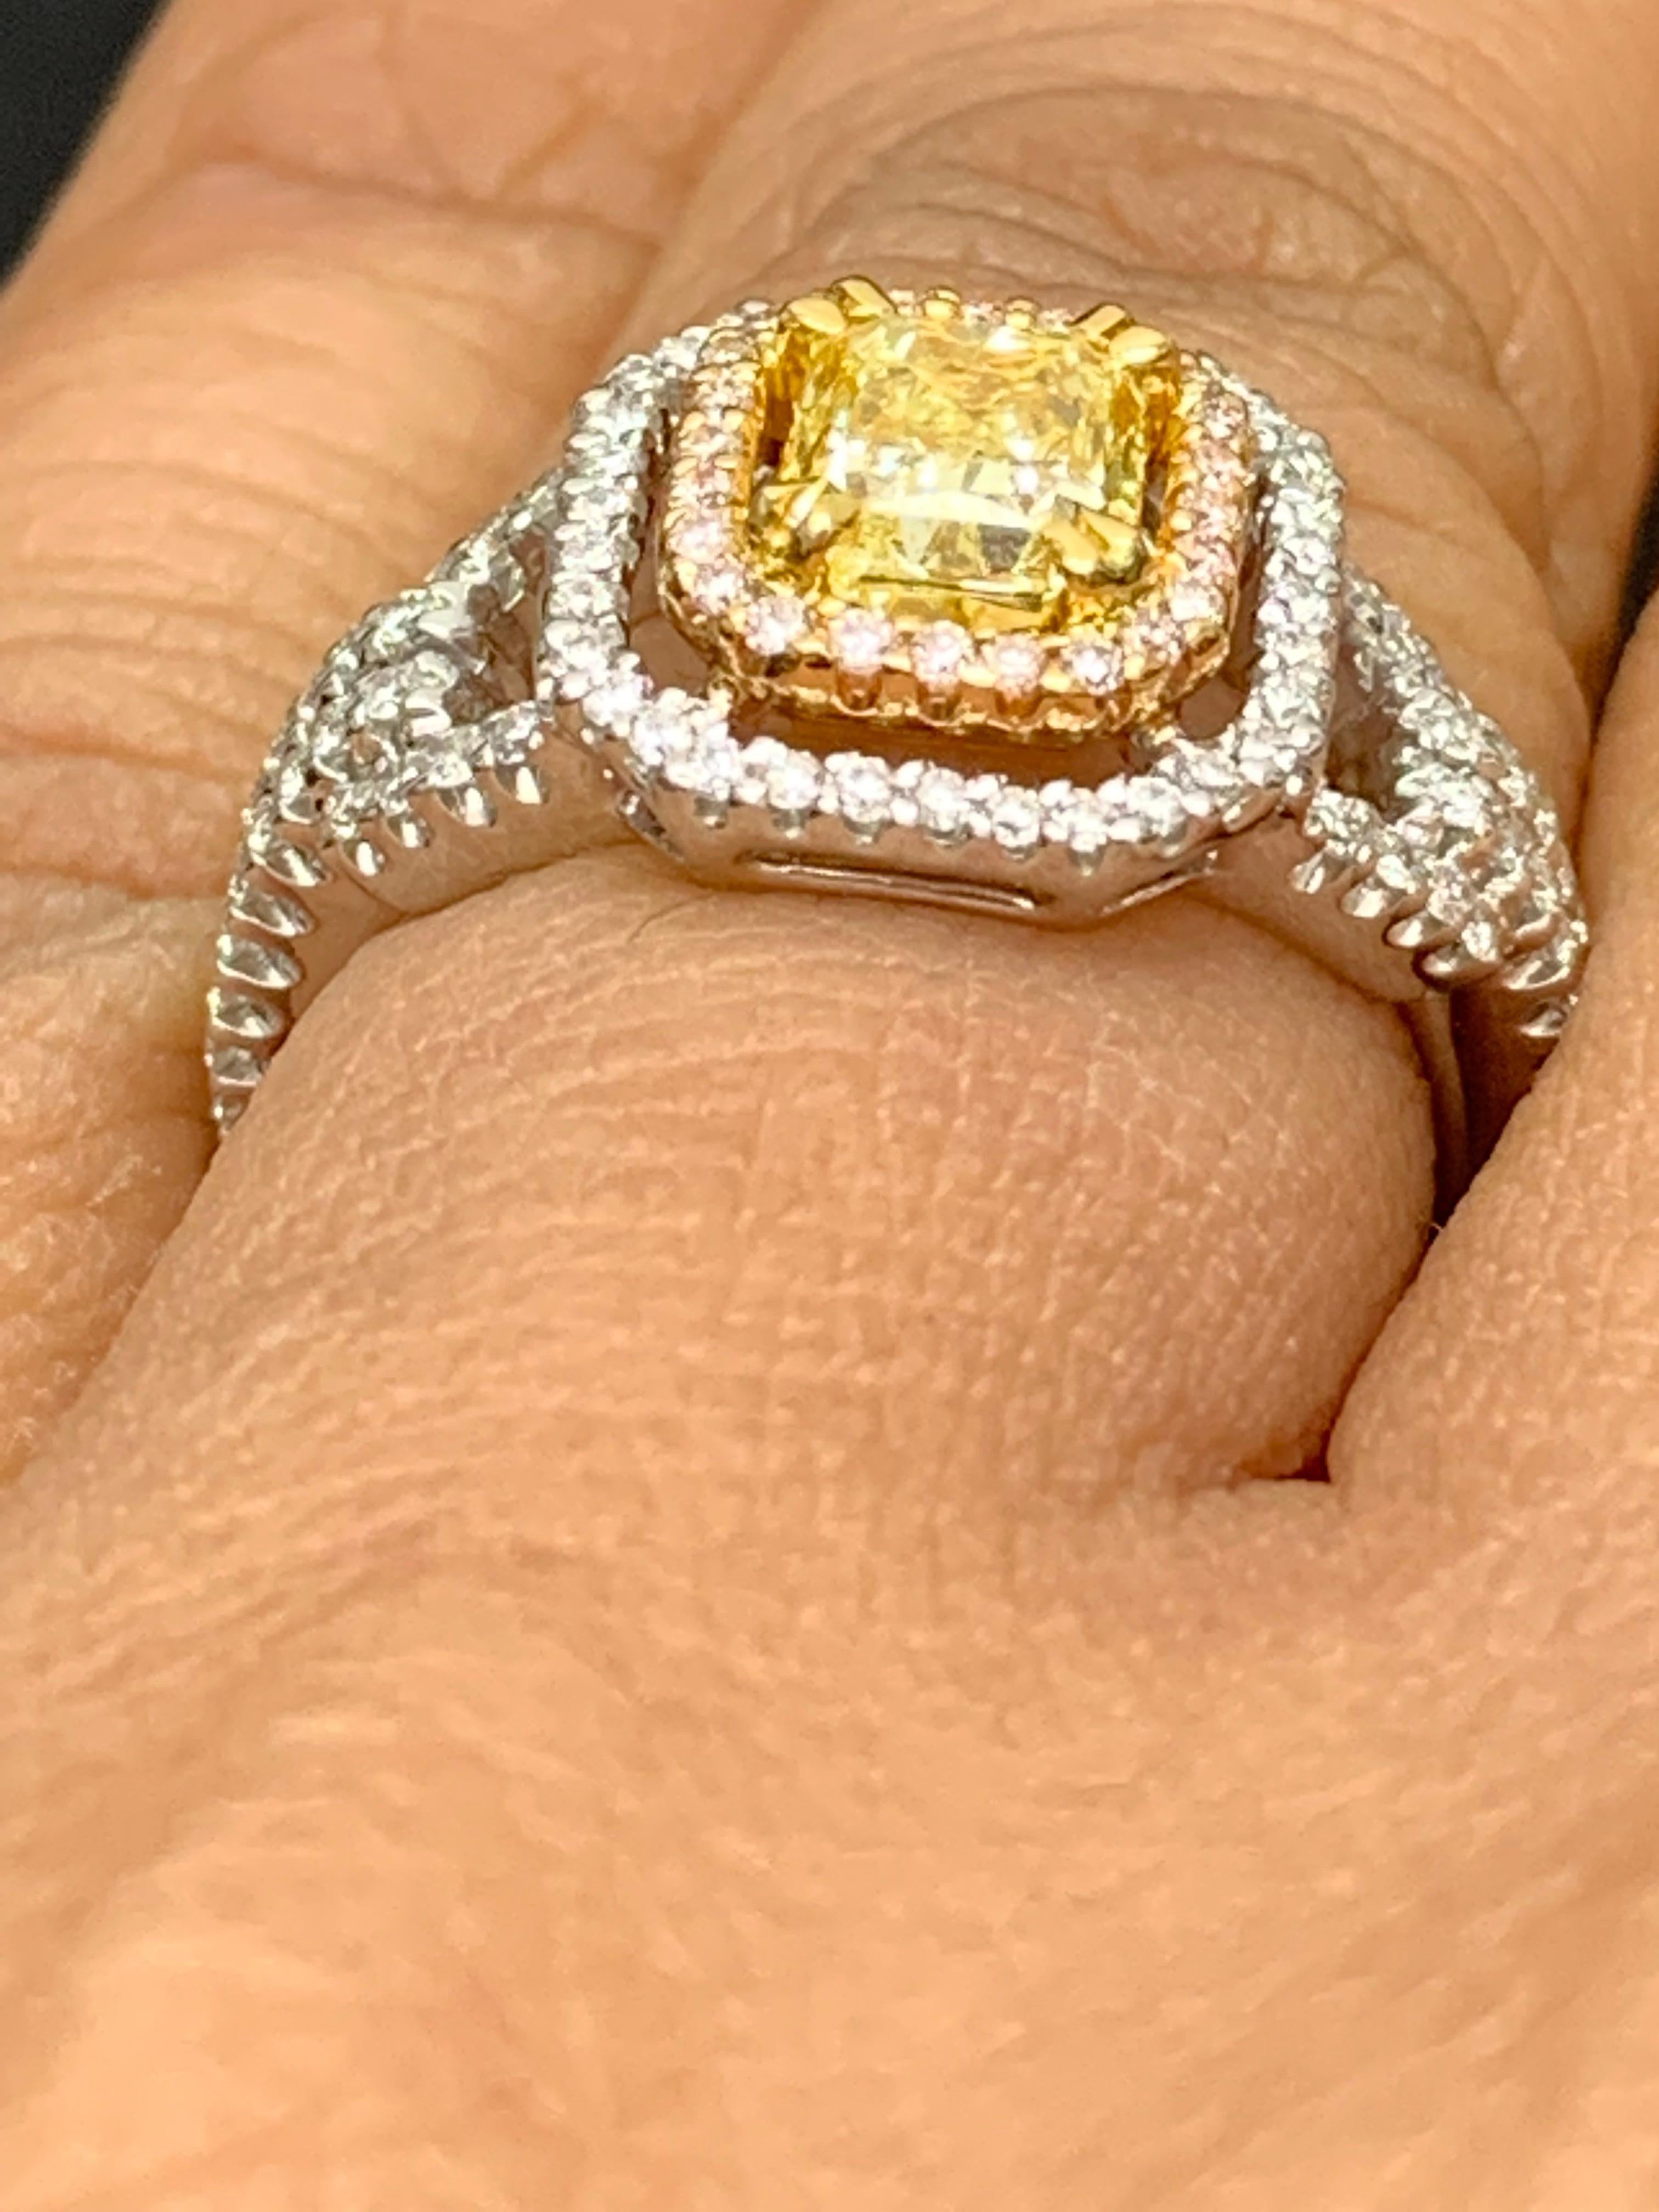 1 Carat Emerald Cut Yellow Diamond Ring in 18k Mix Gold For Sale 4